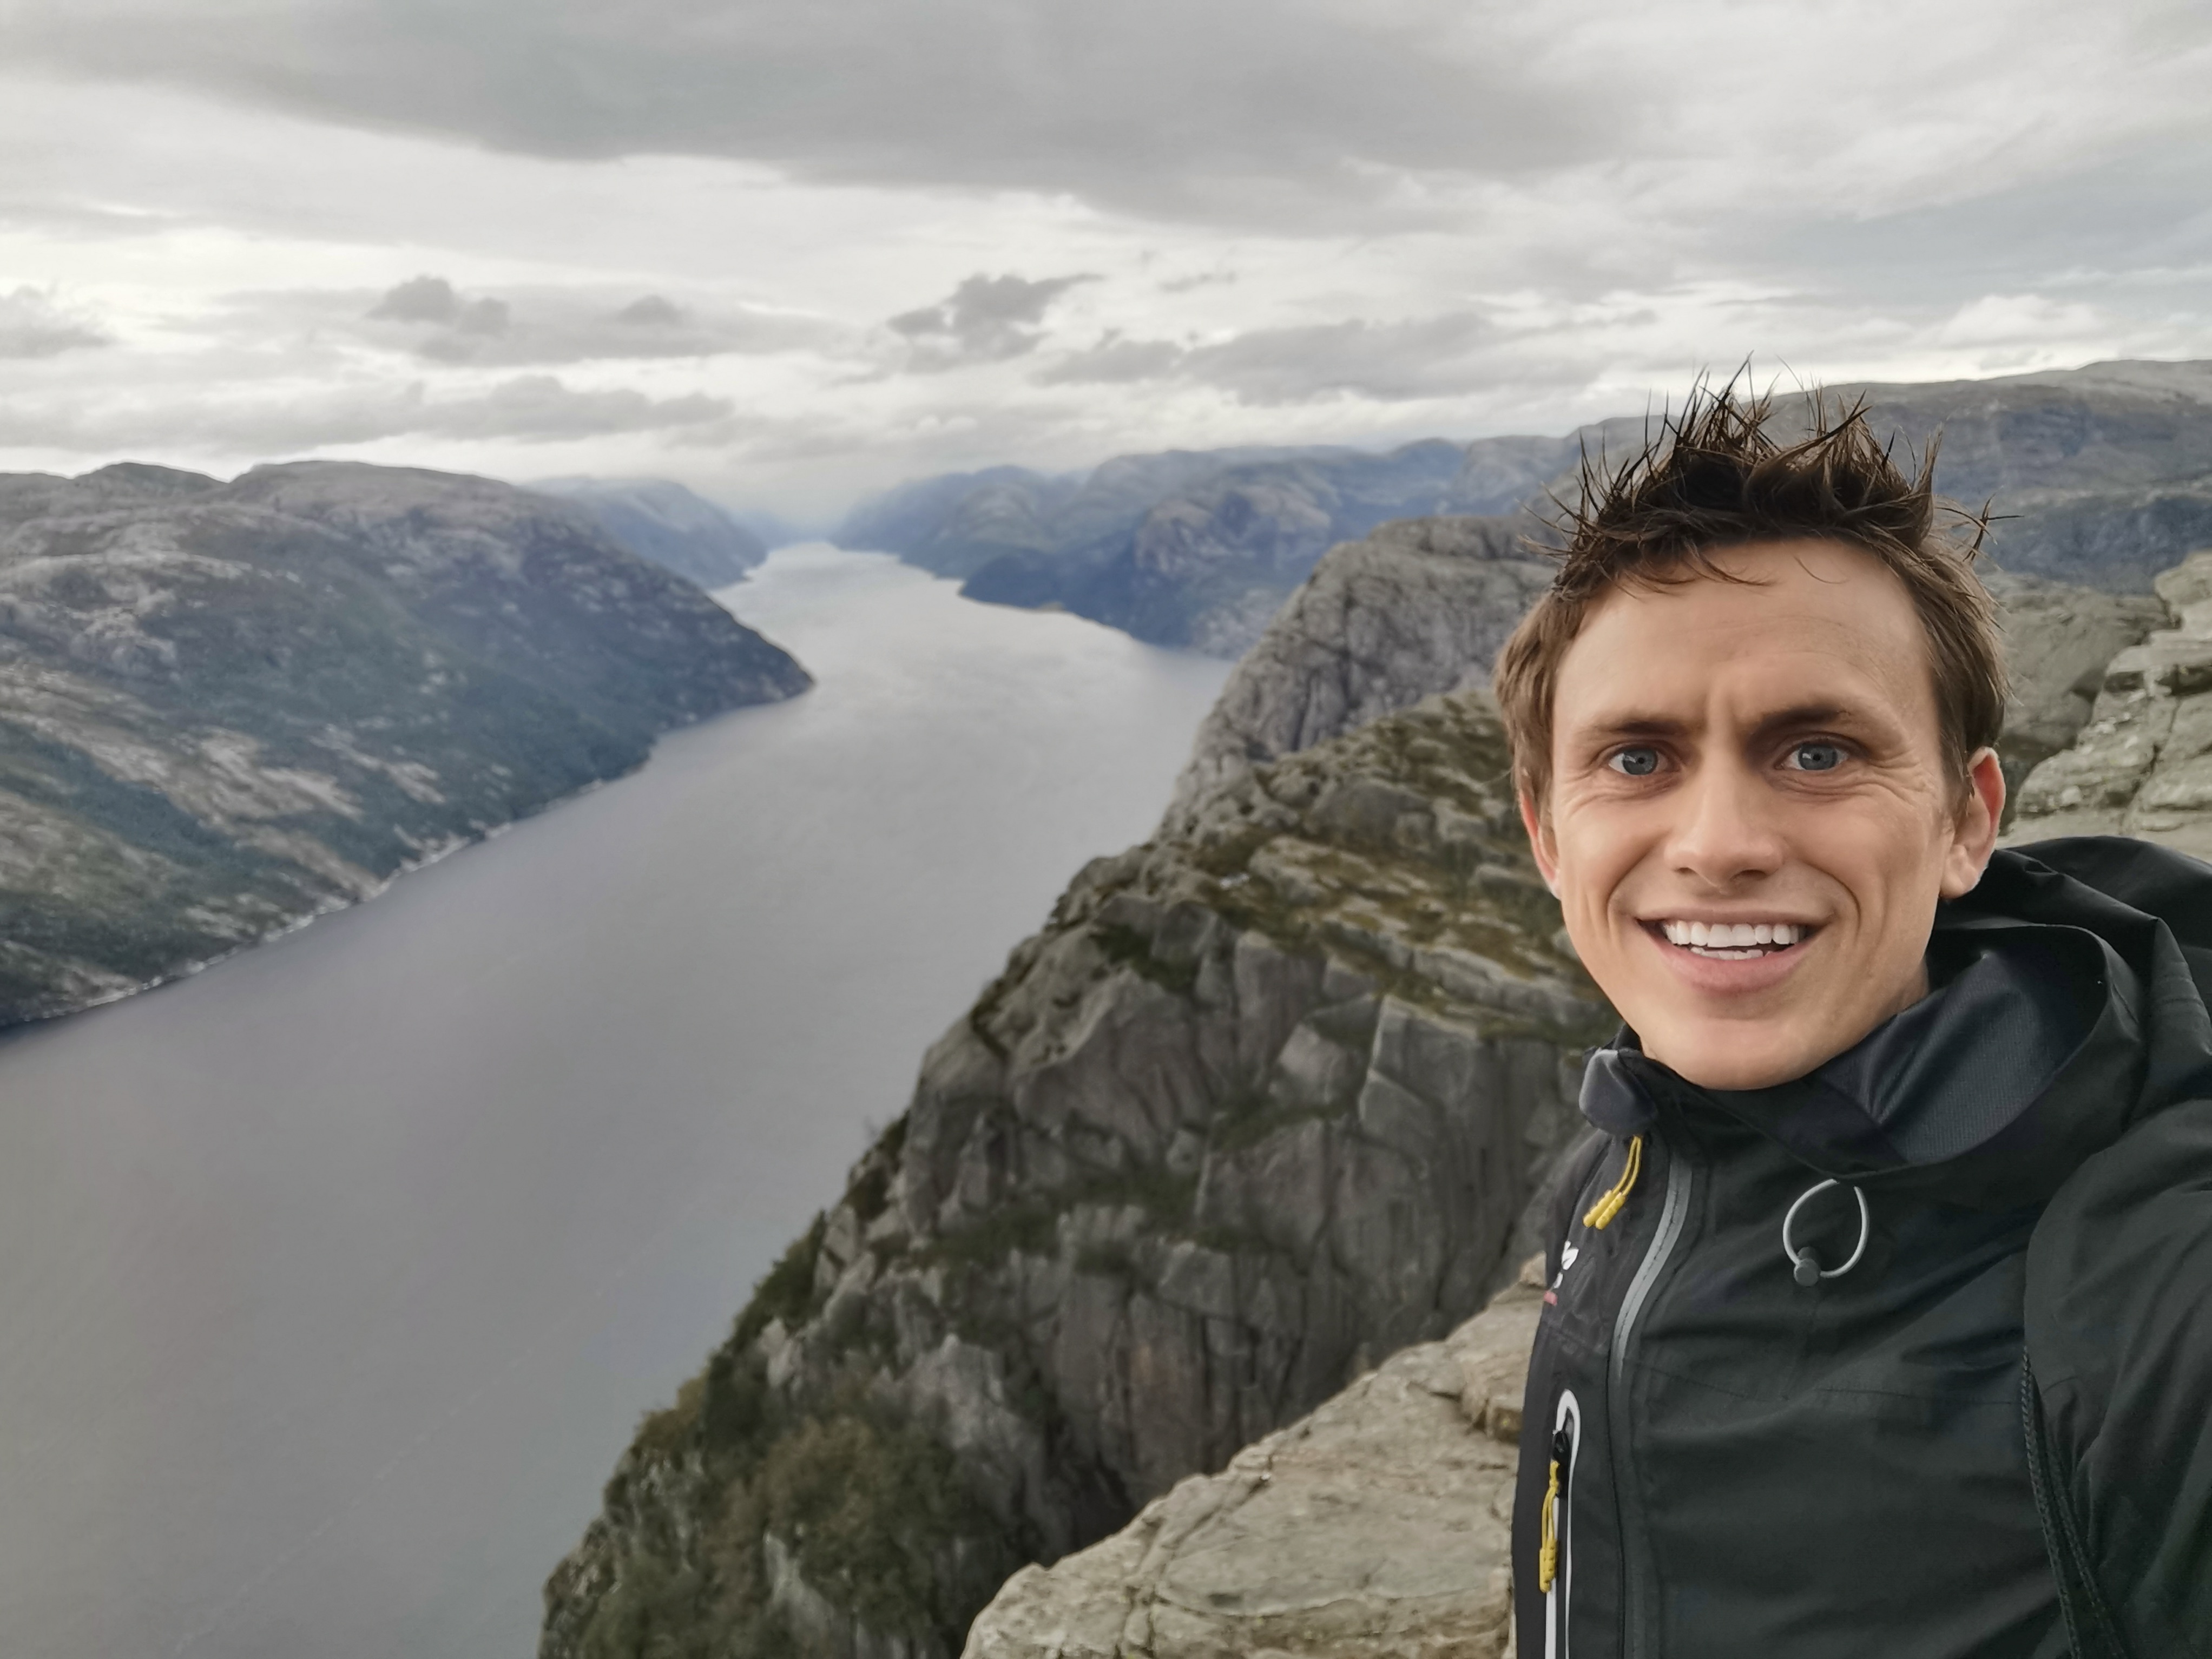 Self-shot portrait of Danny overlooking a fjord